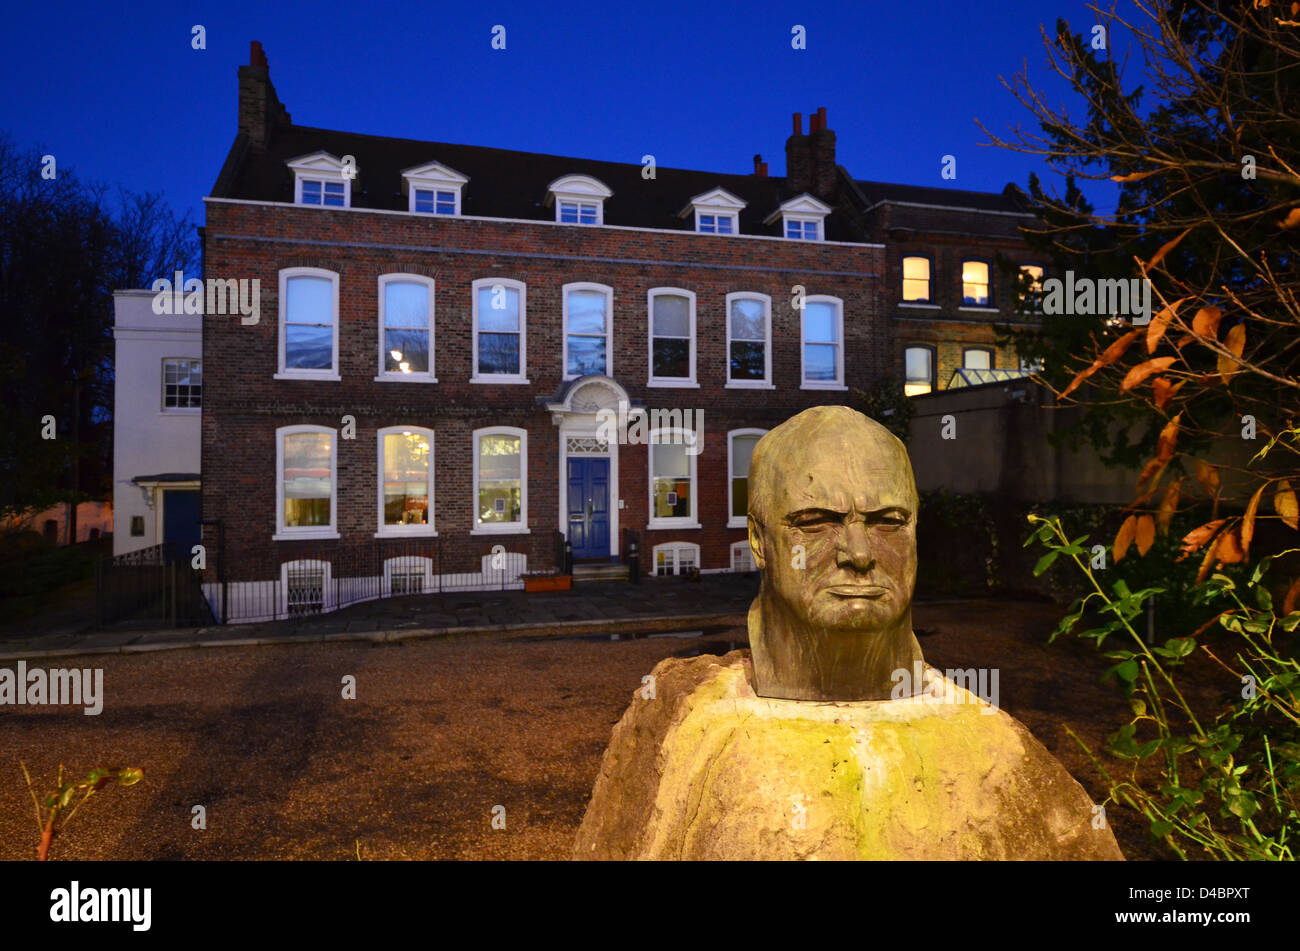 BUST OF SIR WINSTON CHURCHILL IN FRONT OF THE MANOR HOUSE, WANSTEAD HIGH STREET, LONDON Stock Photo